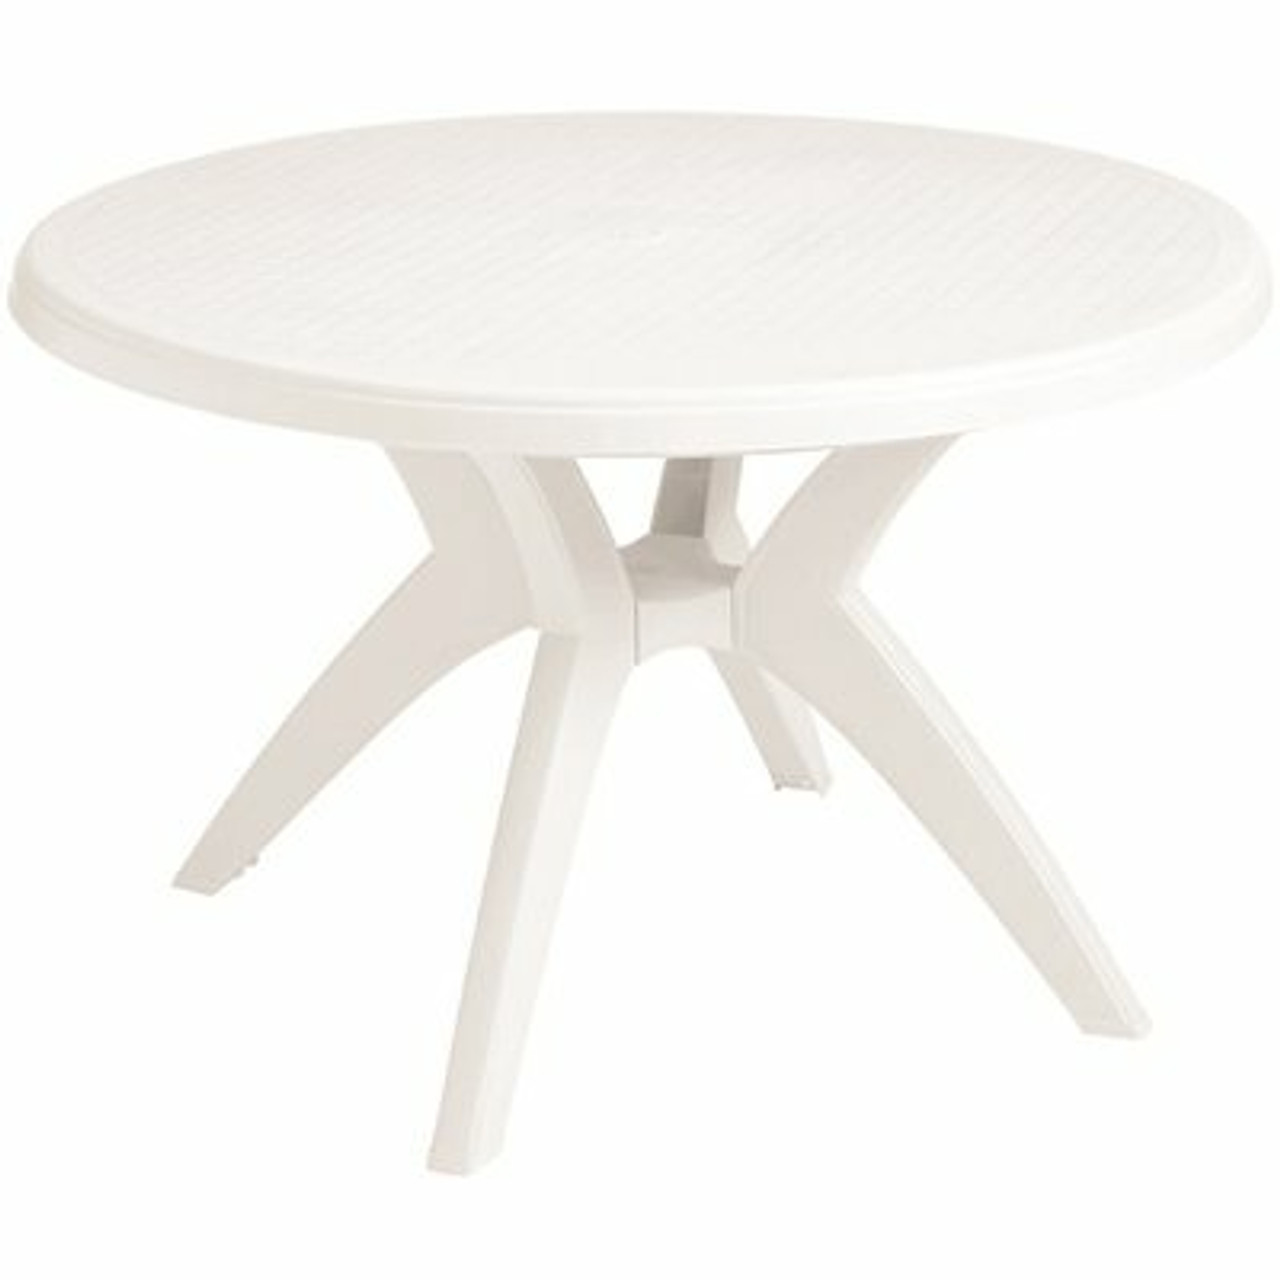 Grosfillex Ibiza 46 In. White Round Plastic Outdoor Dining Table